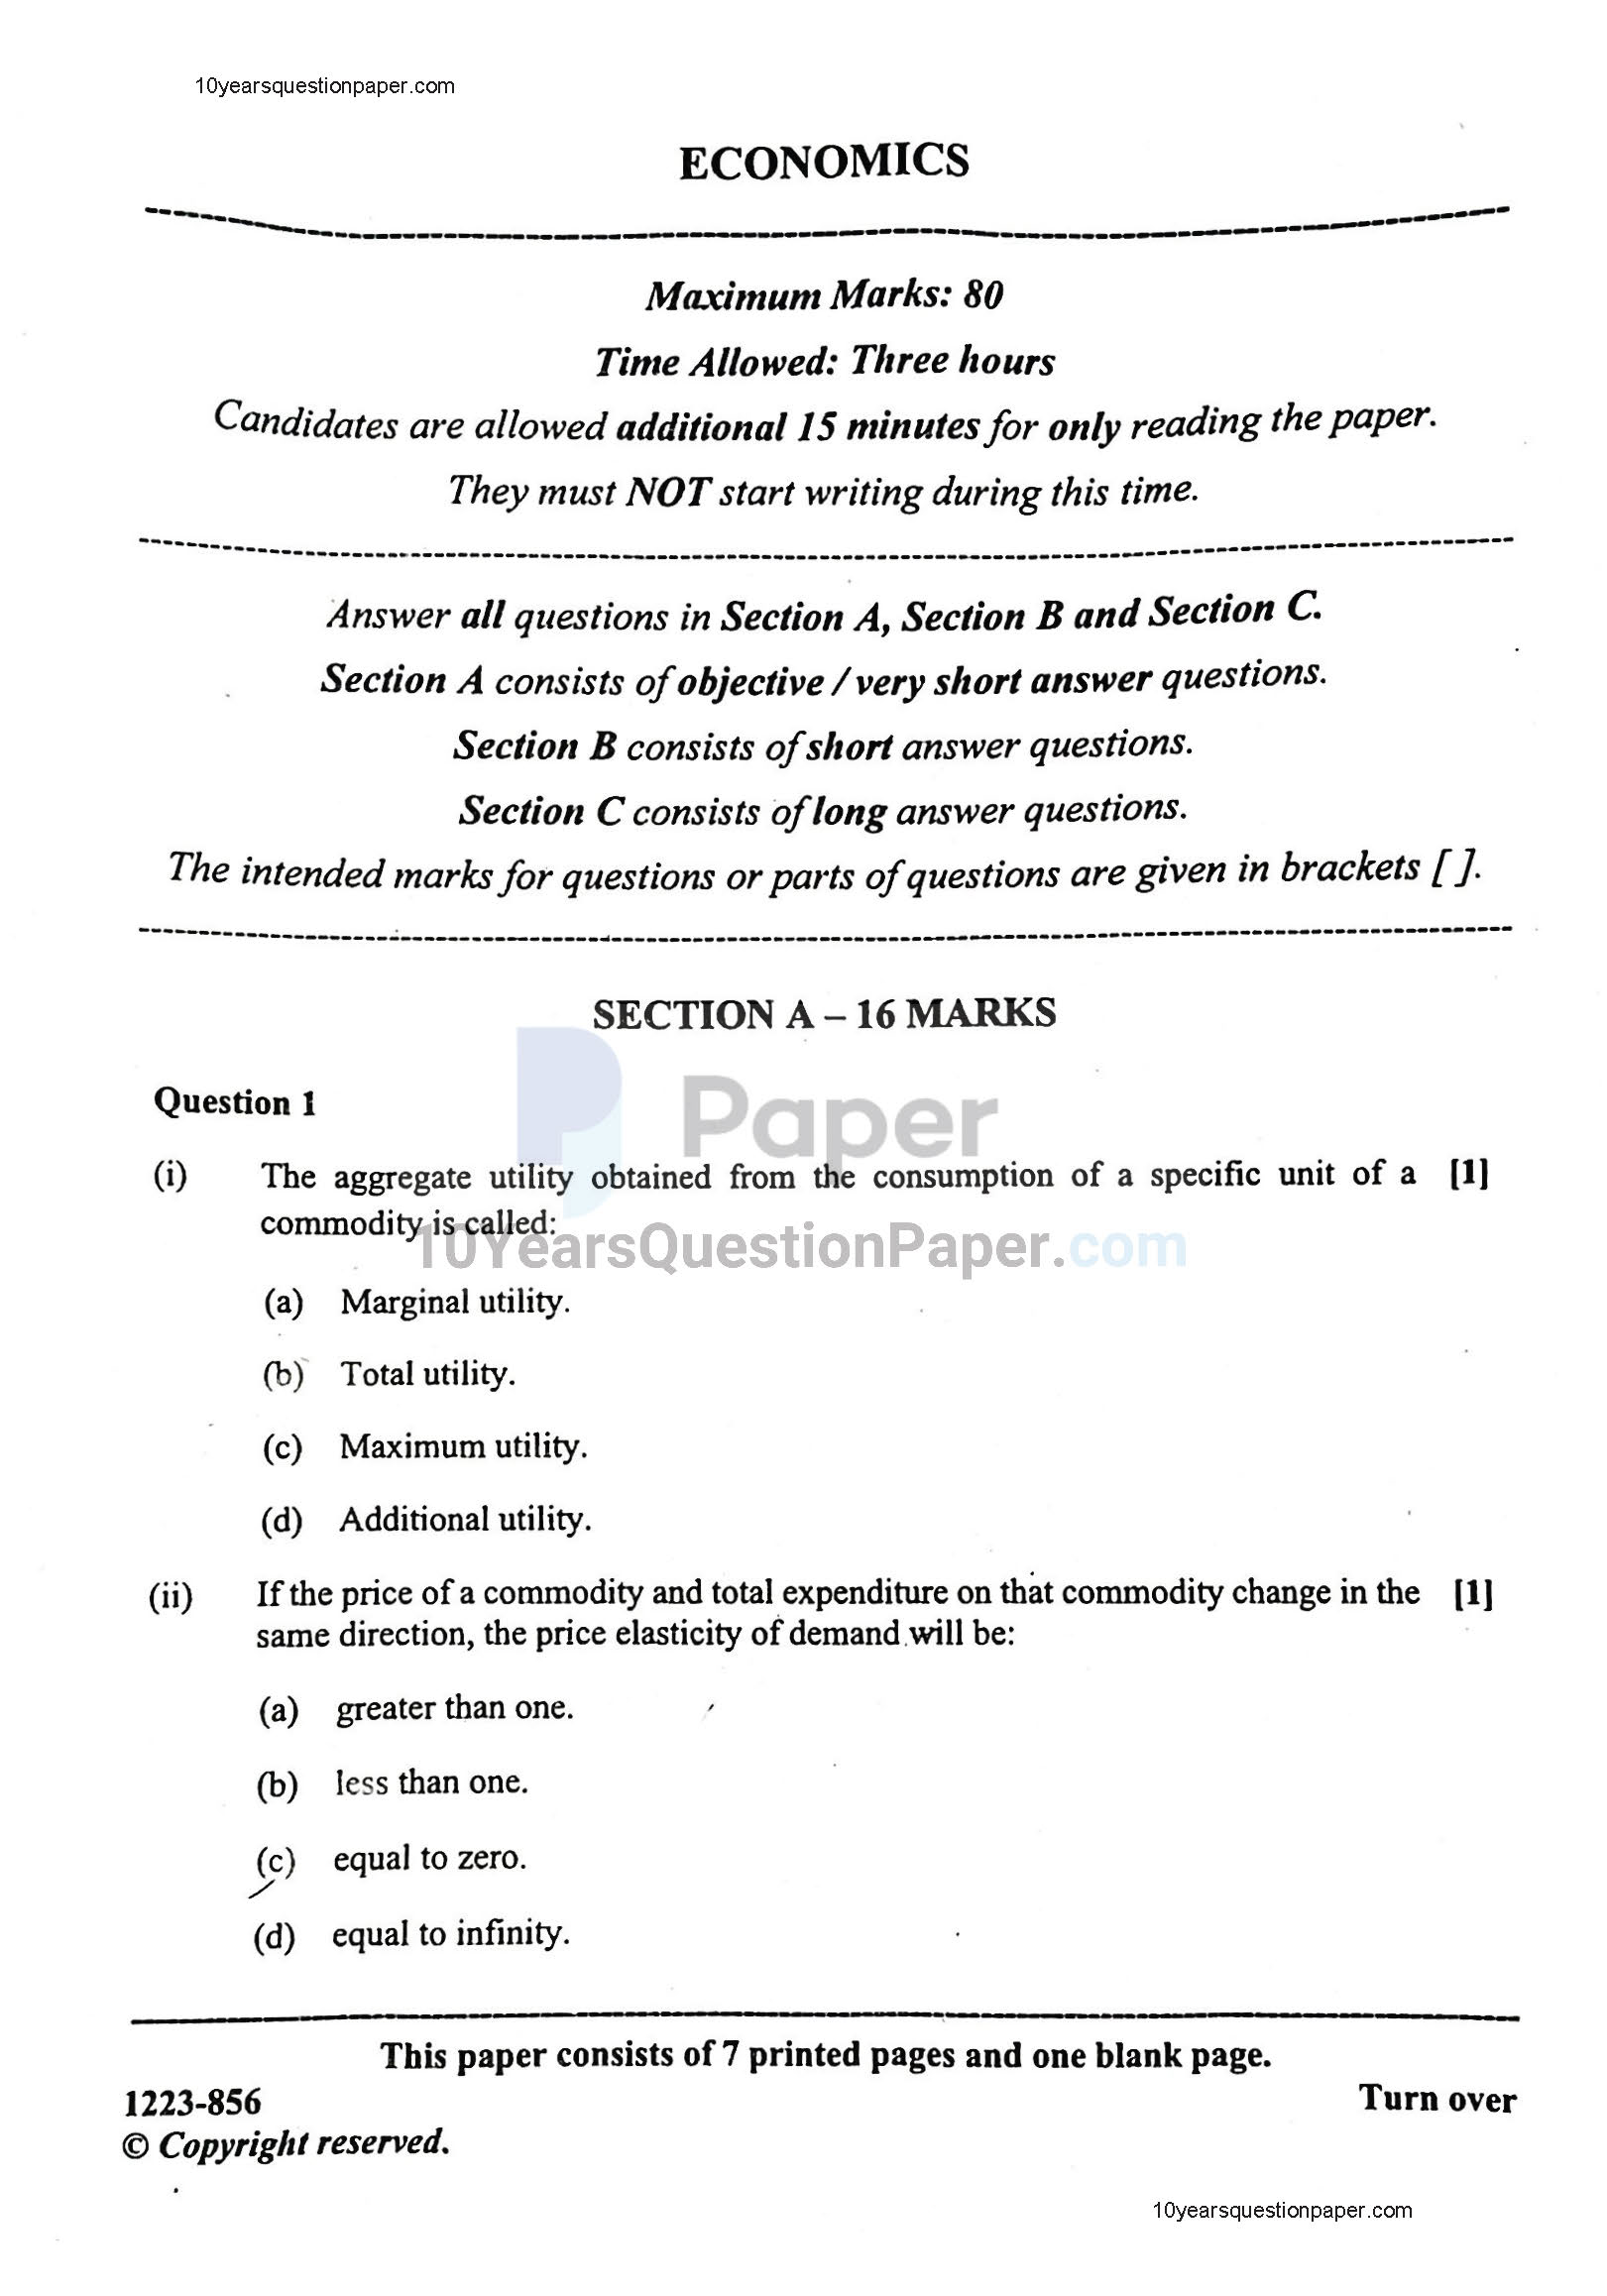 research methodology in economics question paper